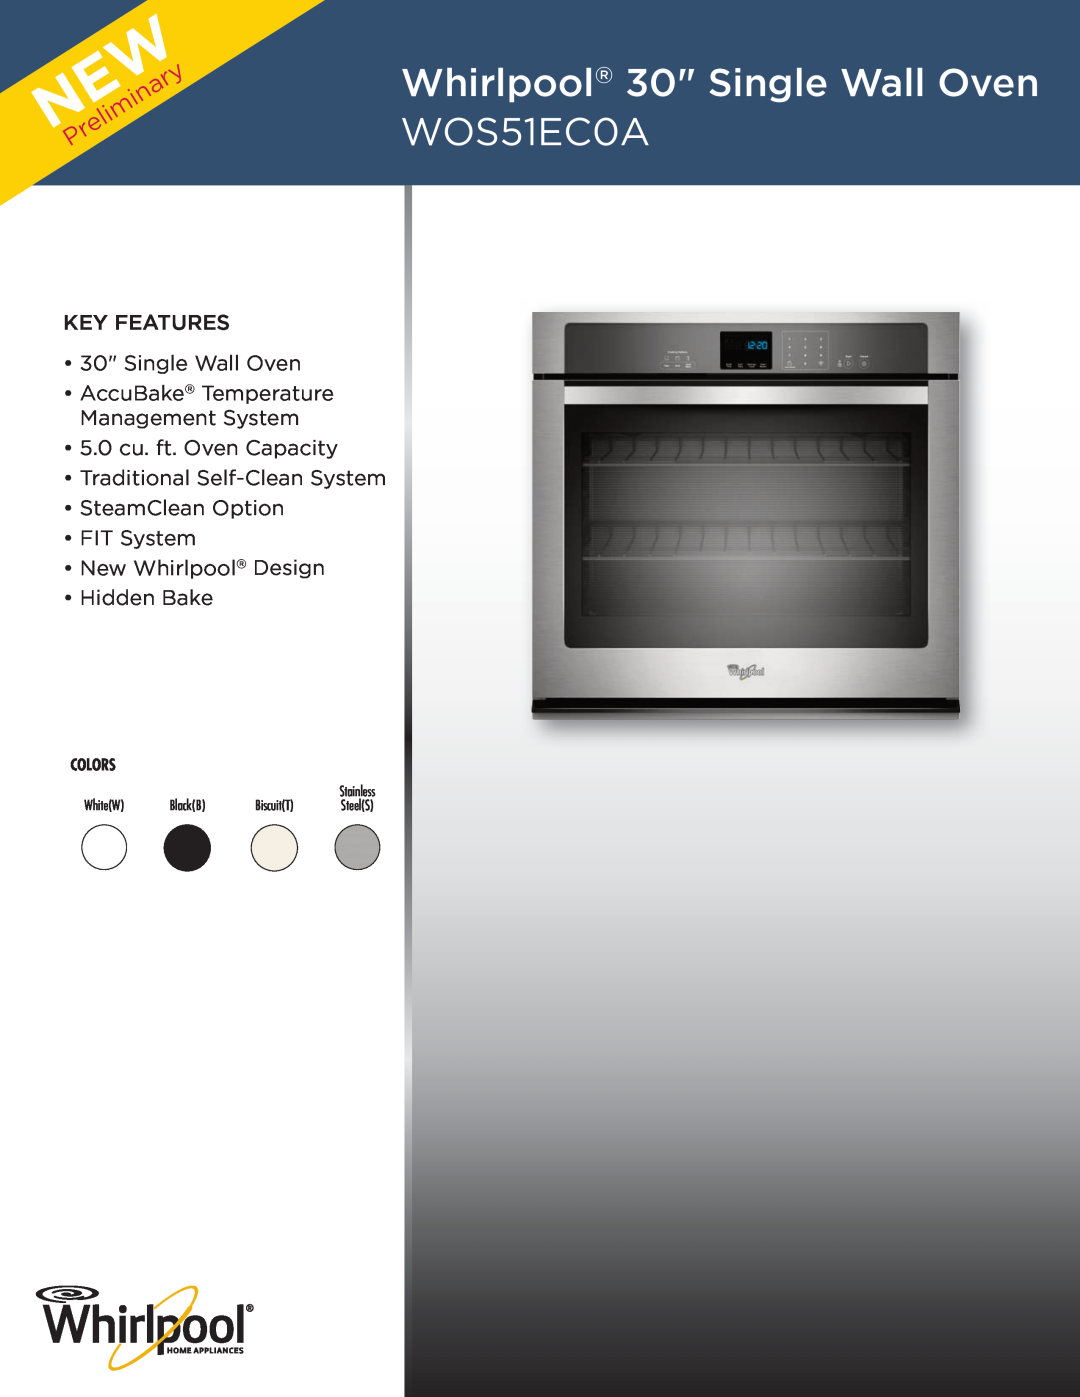 Whirlpool WOS51EC0A manual Whirlpool 30 Single Wall Oven wos51ec0a, NEWPreliminary, KEY FEATURES 30 Single Wall Oven 